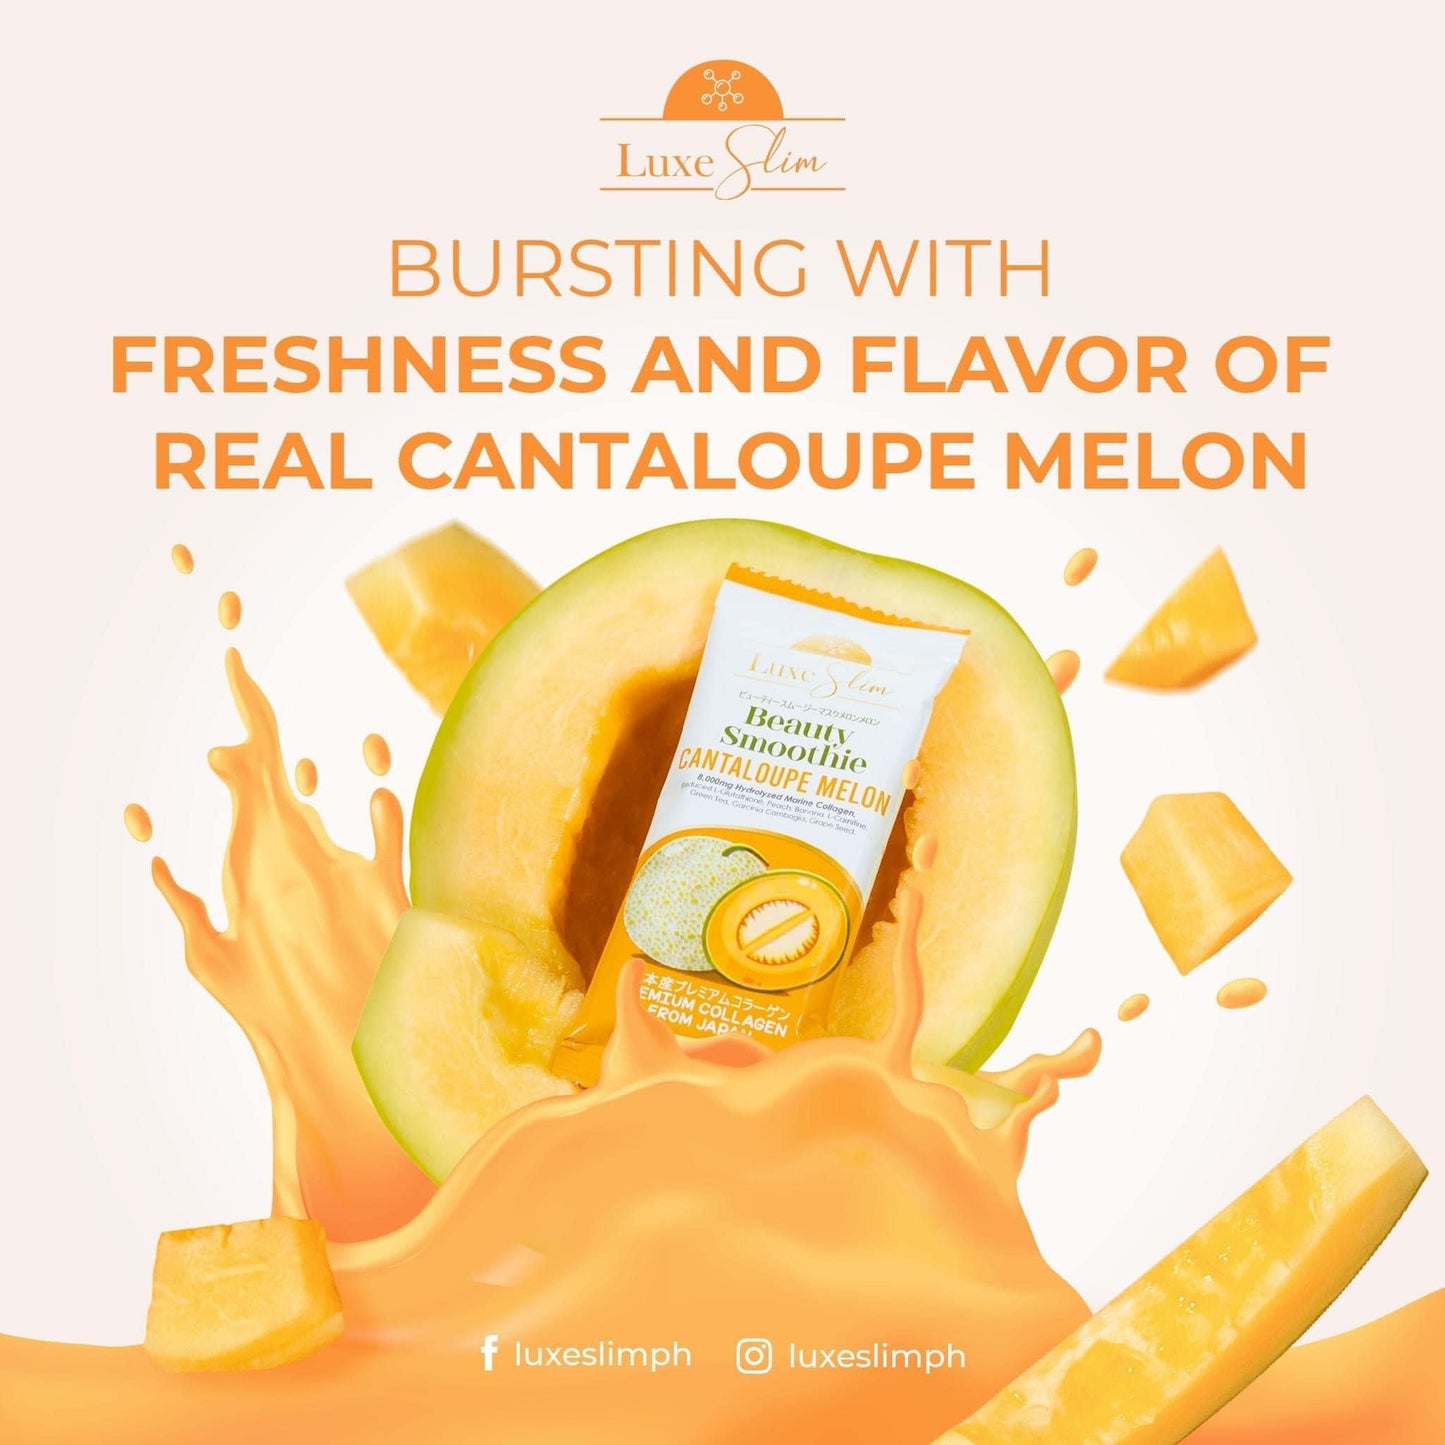 Luxe Slim Beauty Smoothie Cantaloupe Melon